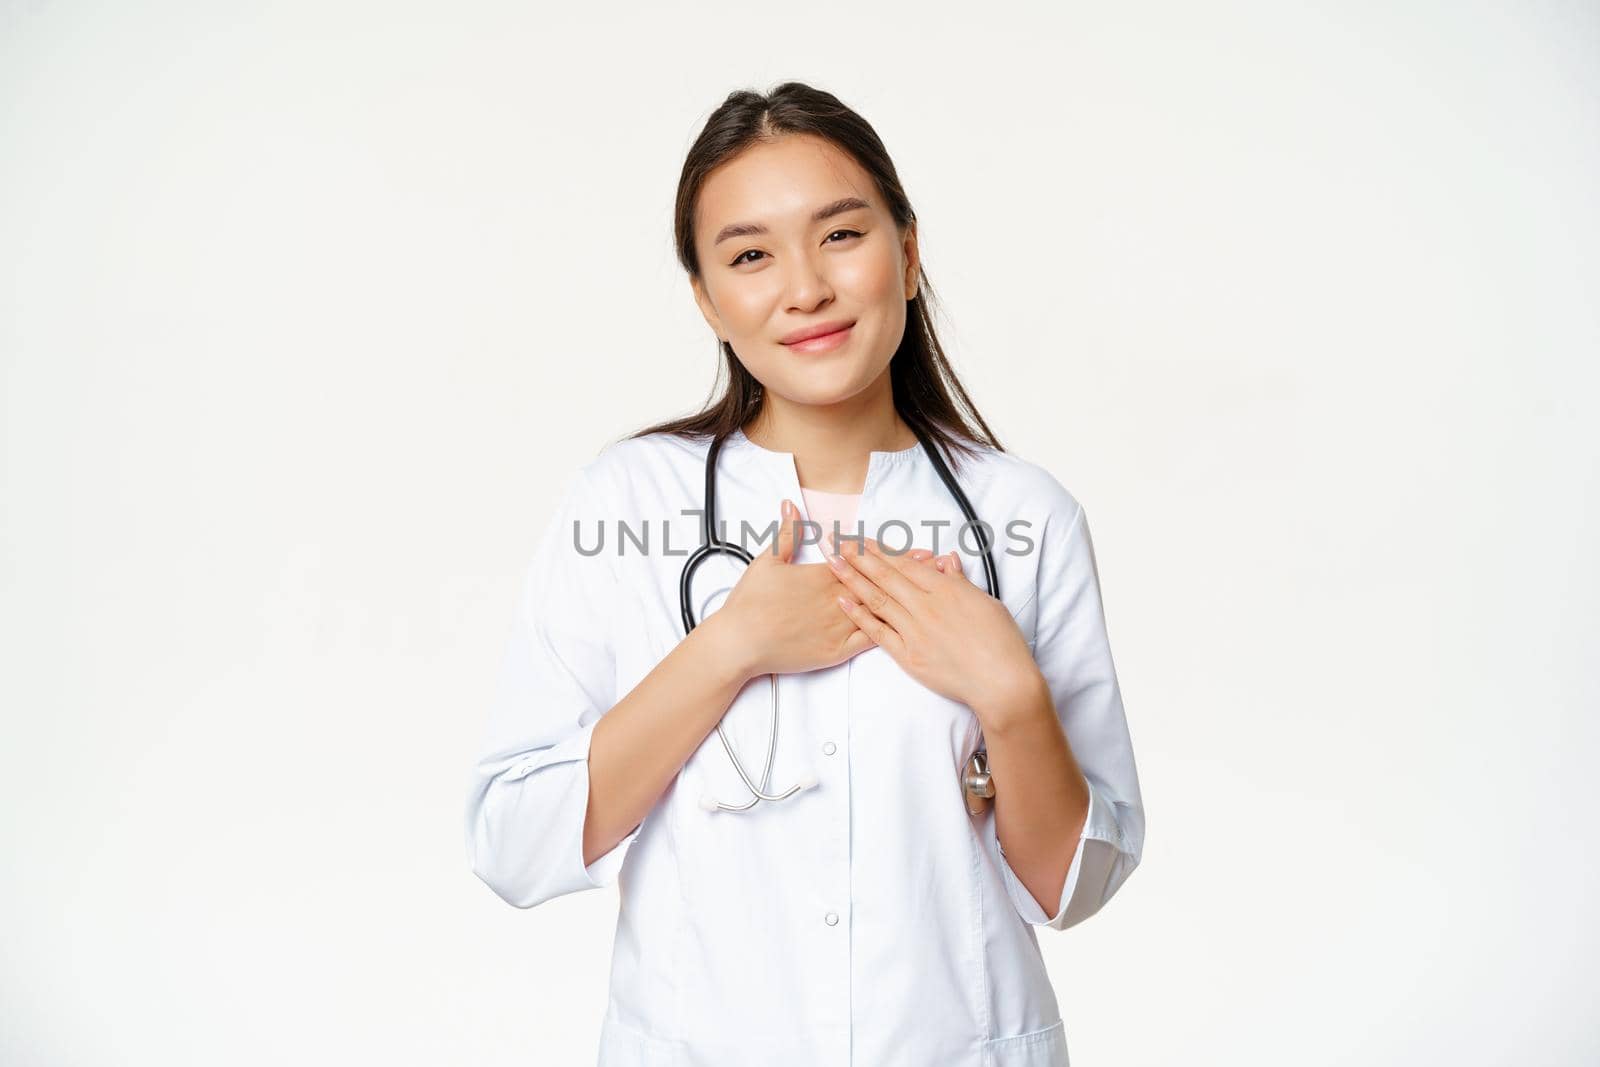 Image of female doctor caring for patients, holding hands on heart, smiling pleasant, standing in medical uniform against white background.